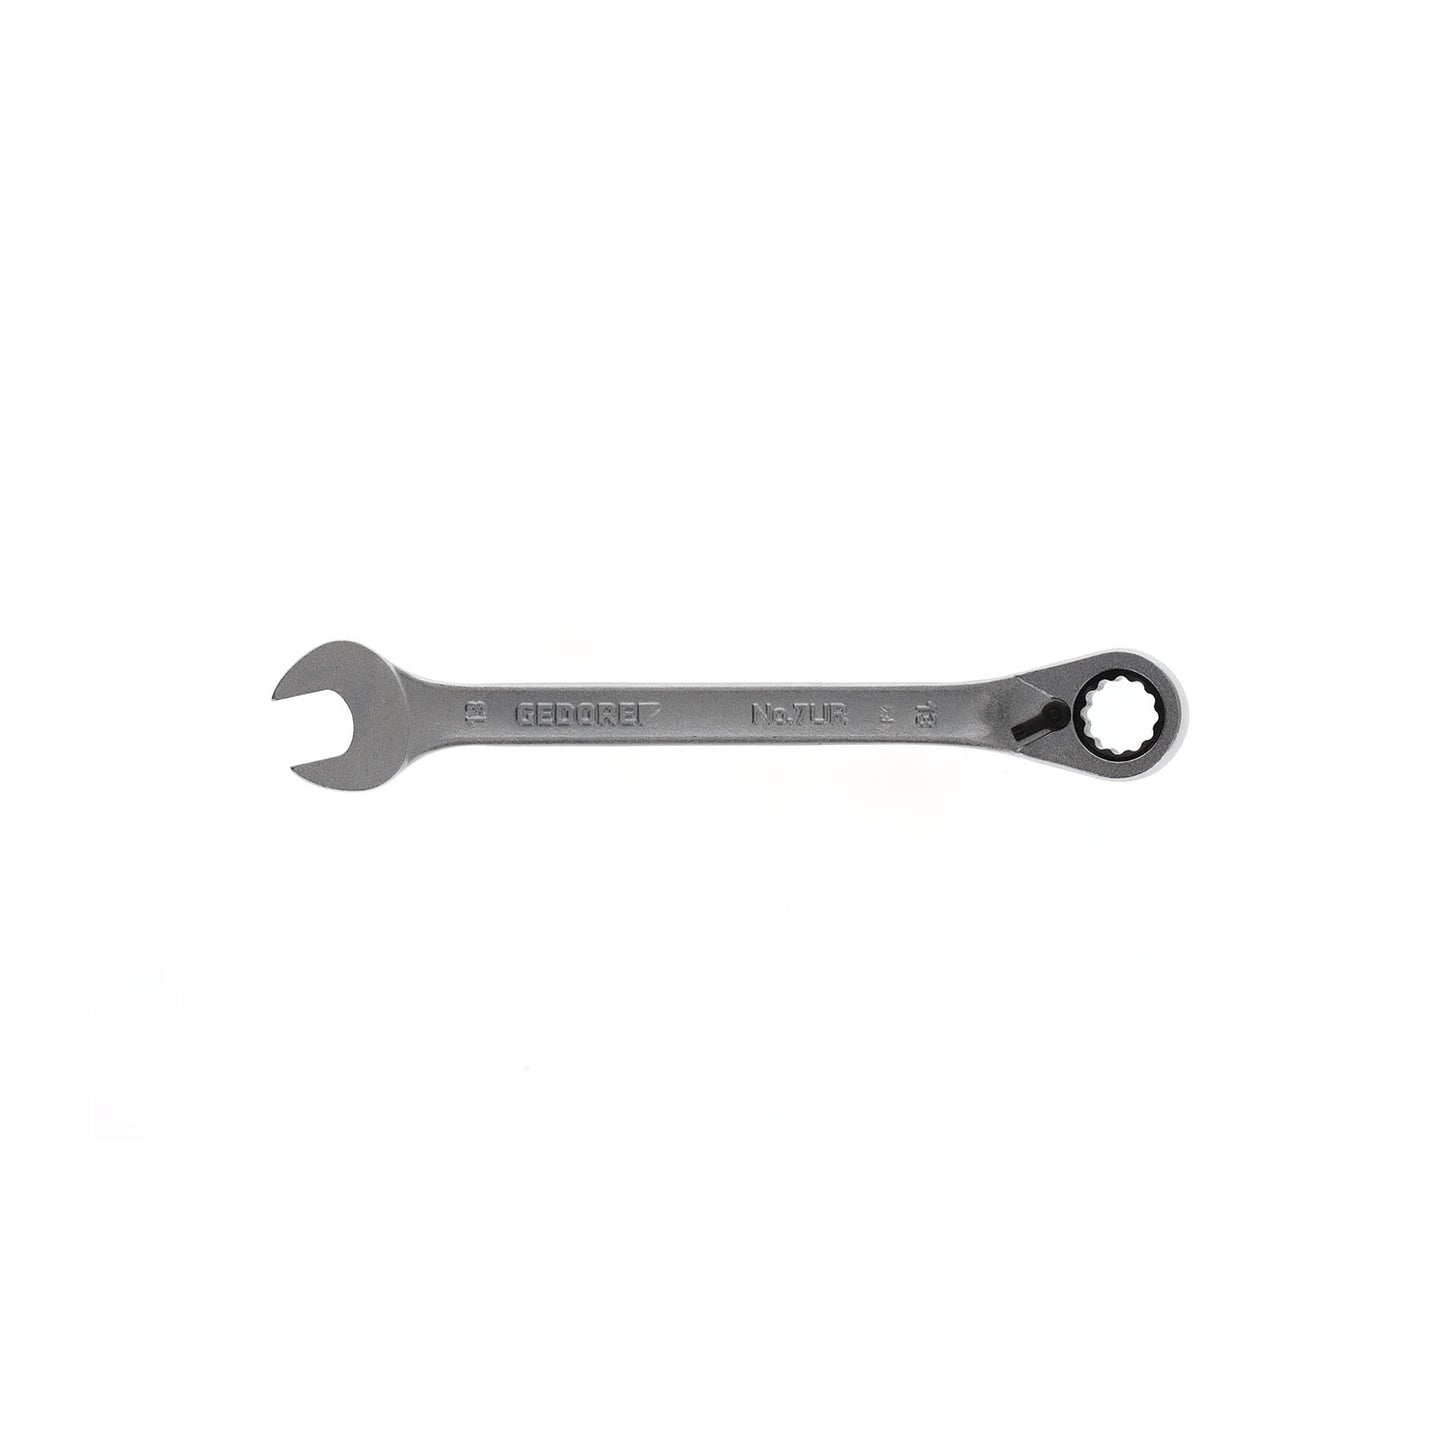 GEDORE 7 UR 13 - Ratchet combination wrench, 13mm (2297302)